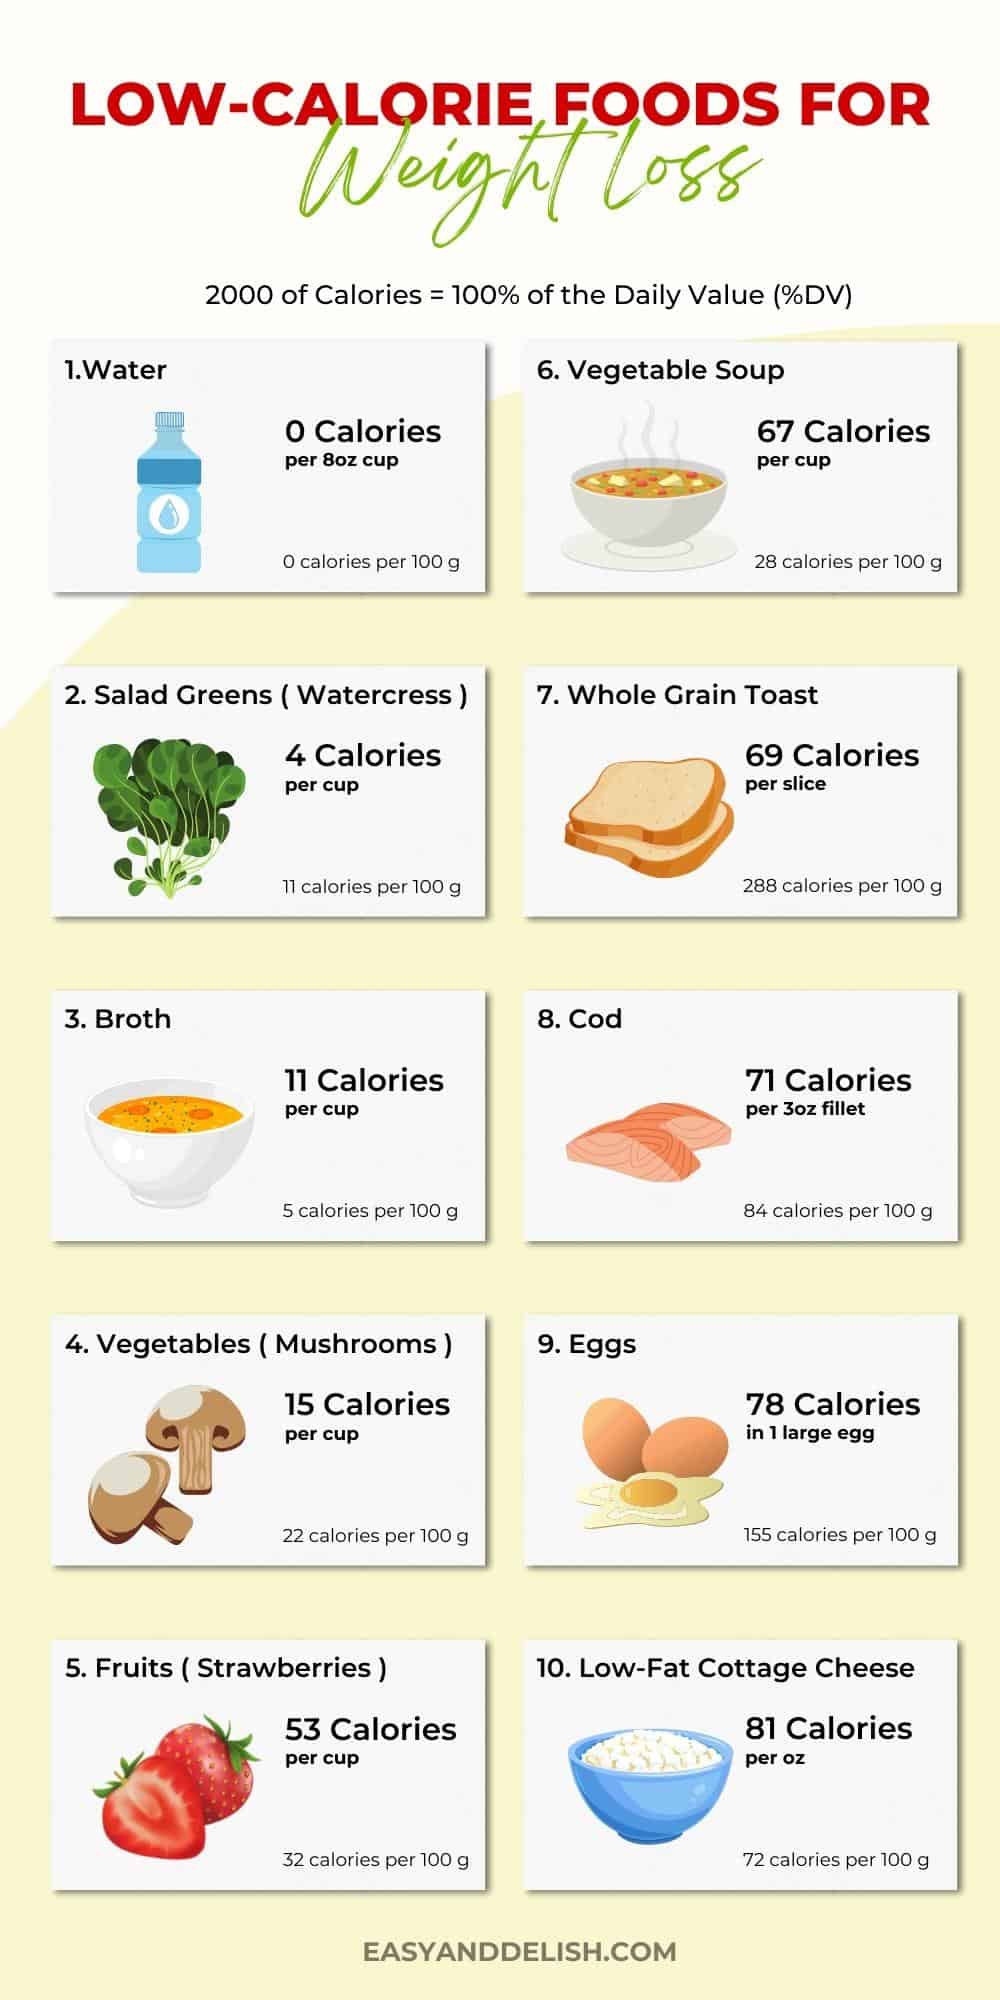 Discover Delicious Low Calorie Foods for a Healthier You